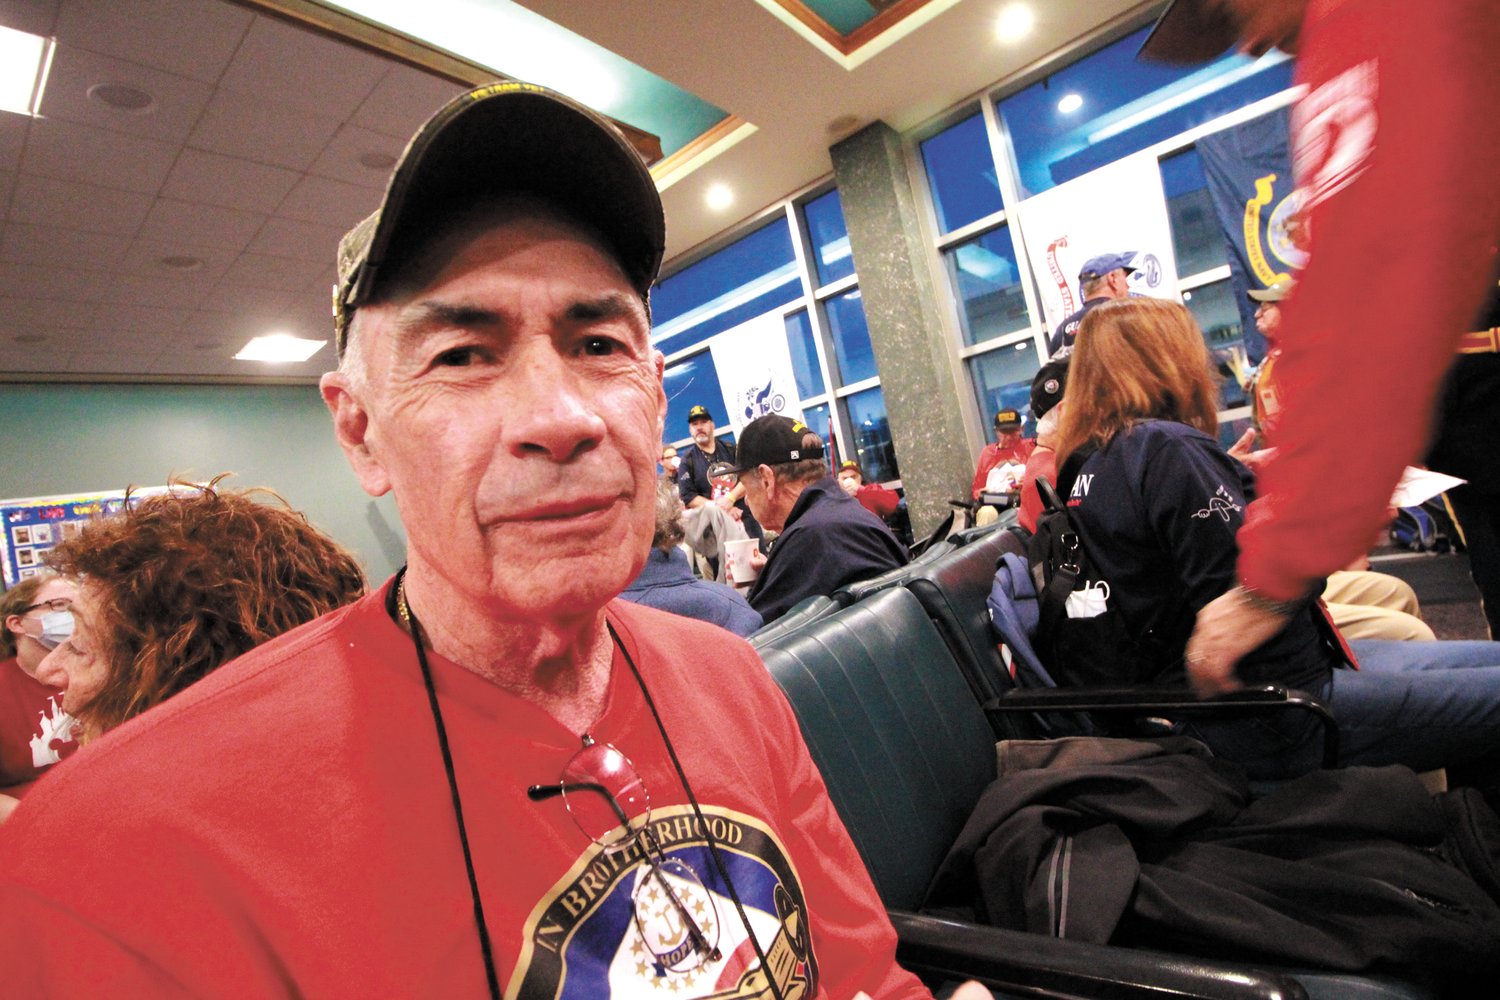 COMING HOME WAS A SURPRISE: Vietnam War veteran Richard Esposito of Cranston recalled events on completion of his deployment to Vietnam. Esposito served as a MP in Saigon.